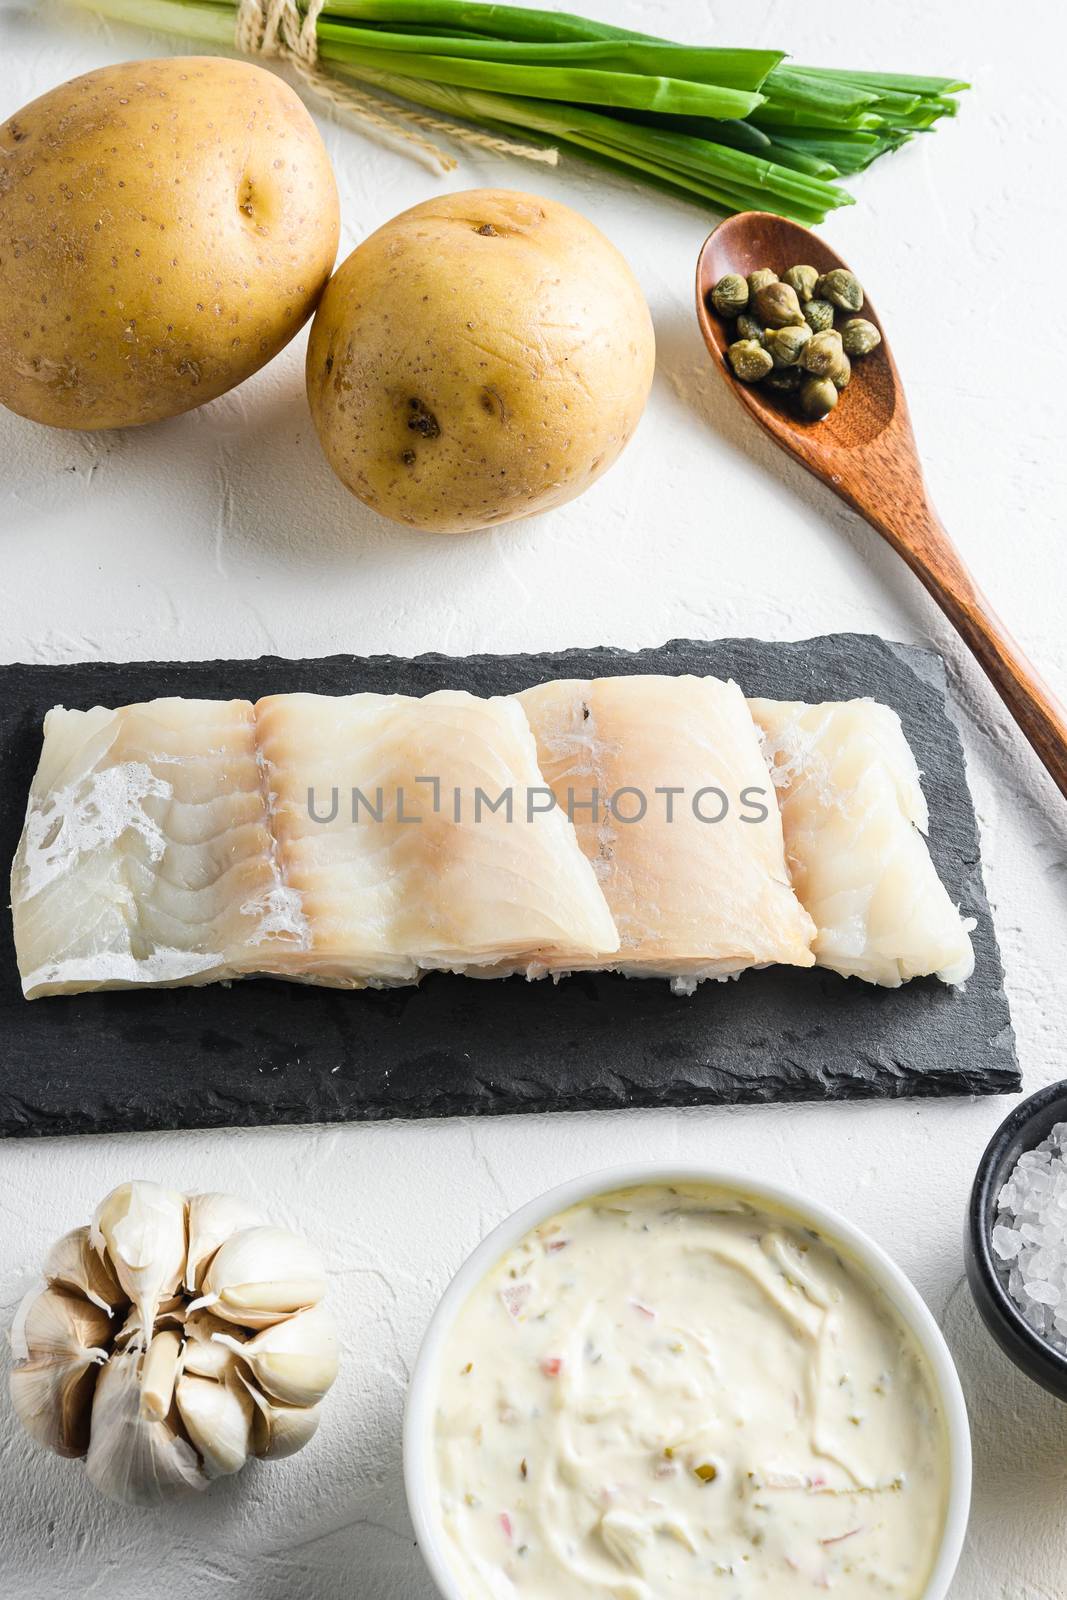 Traditional fish and chips ingredients recipe raw cod fillets on stone slate batter, potatoe, tartar sauce, lemon, capers , green herbs garlic, salt, peppercorns on white stone background side view close up vertical by Ilianesolenyi